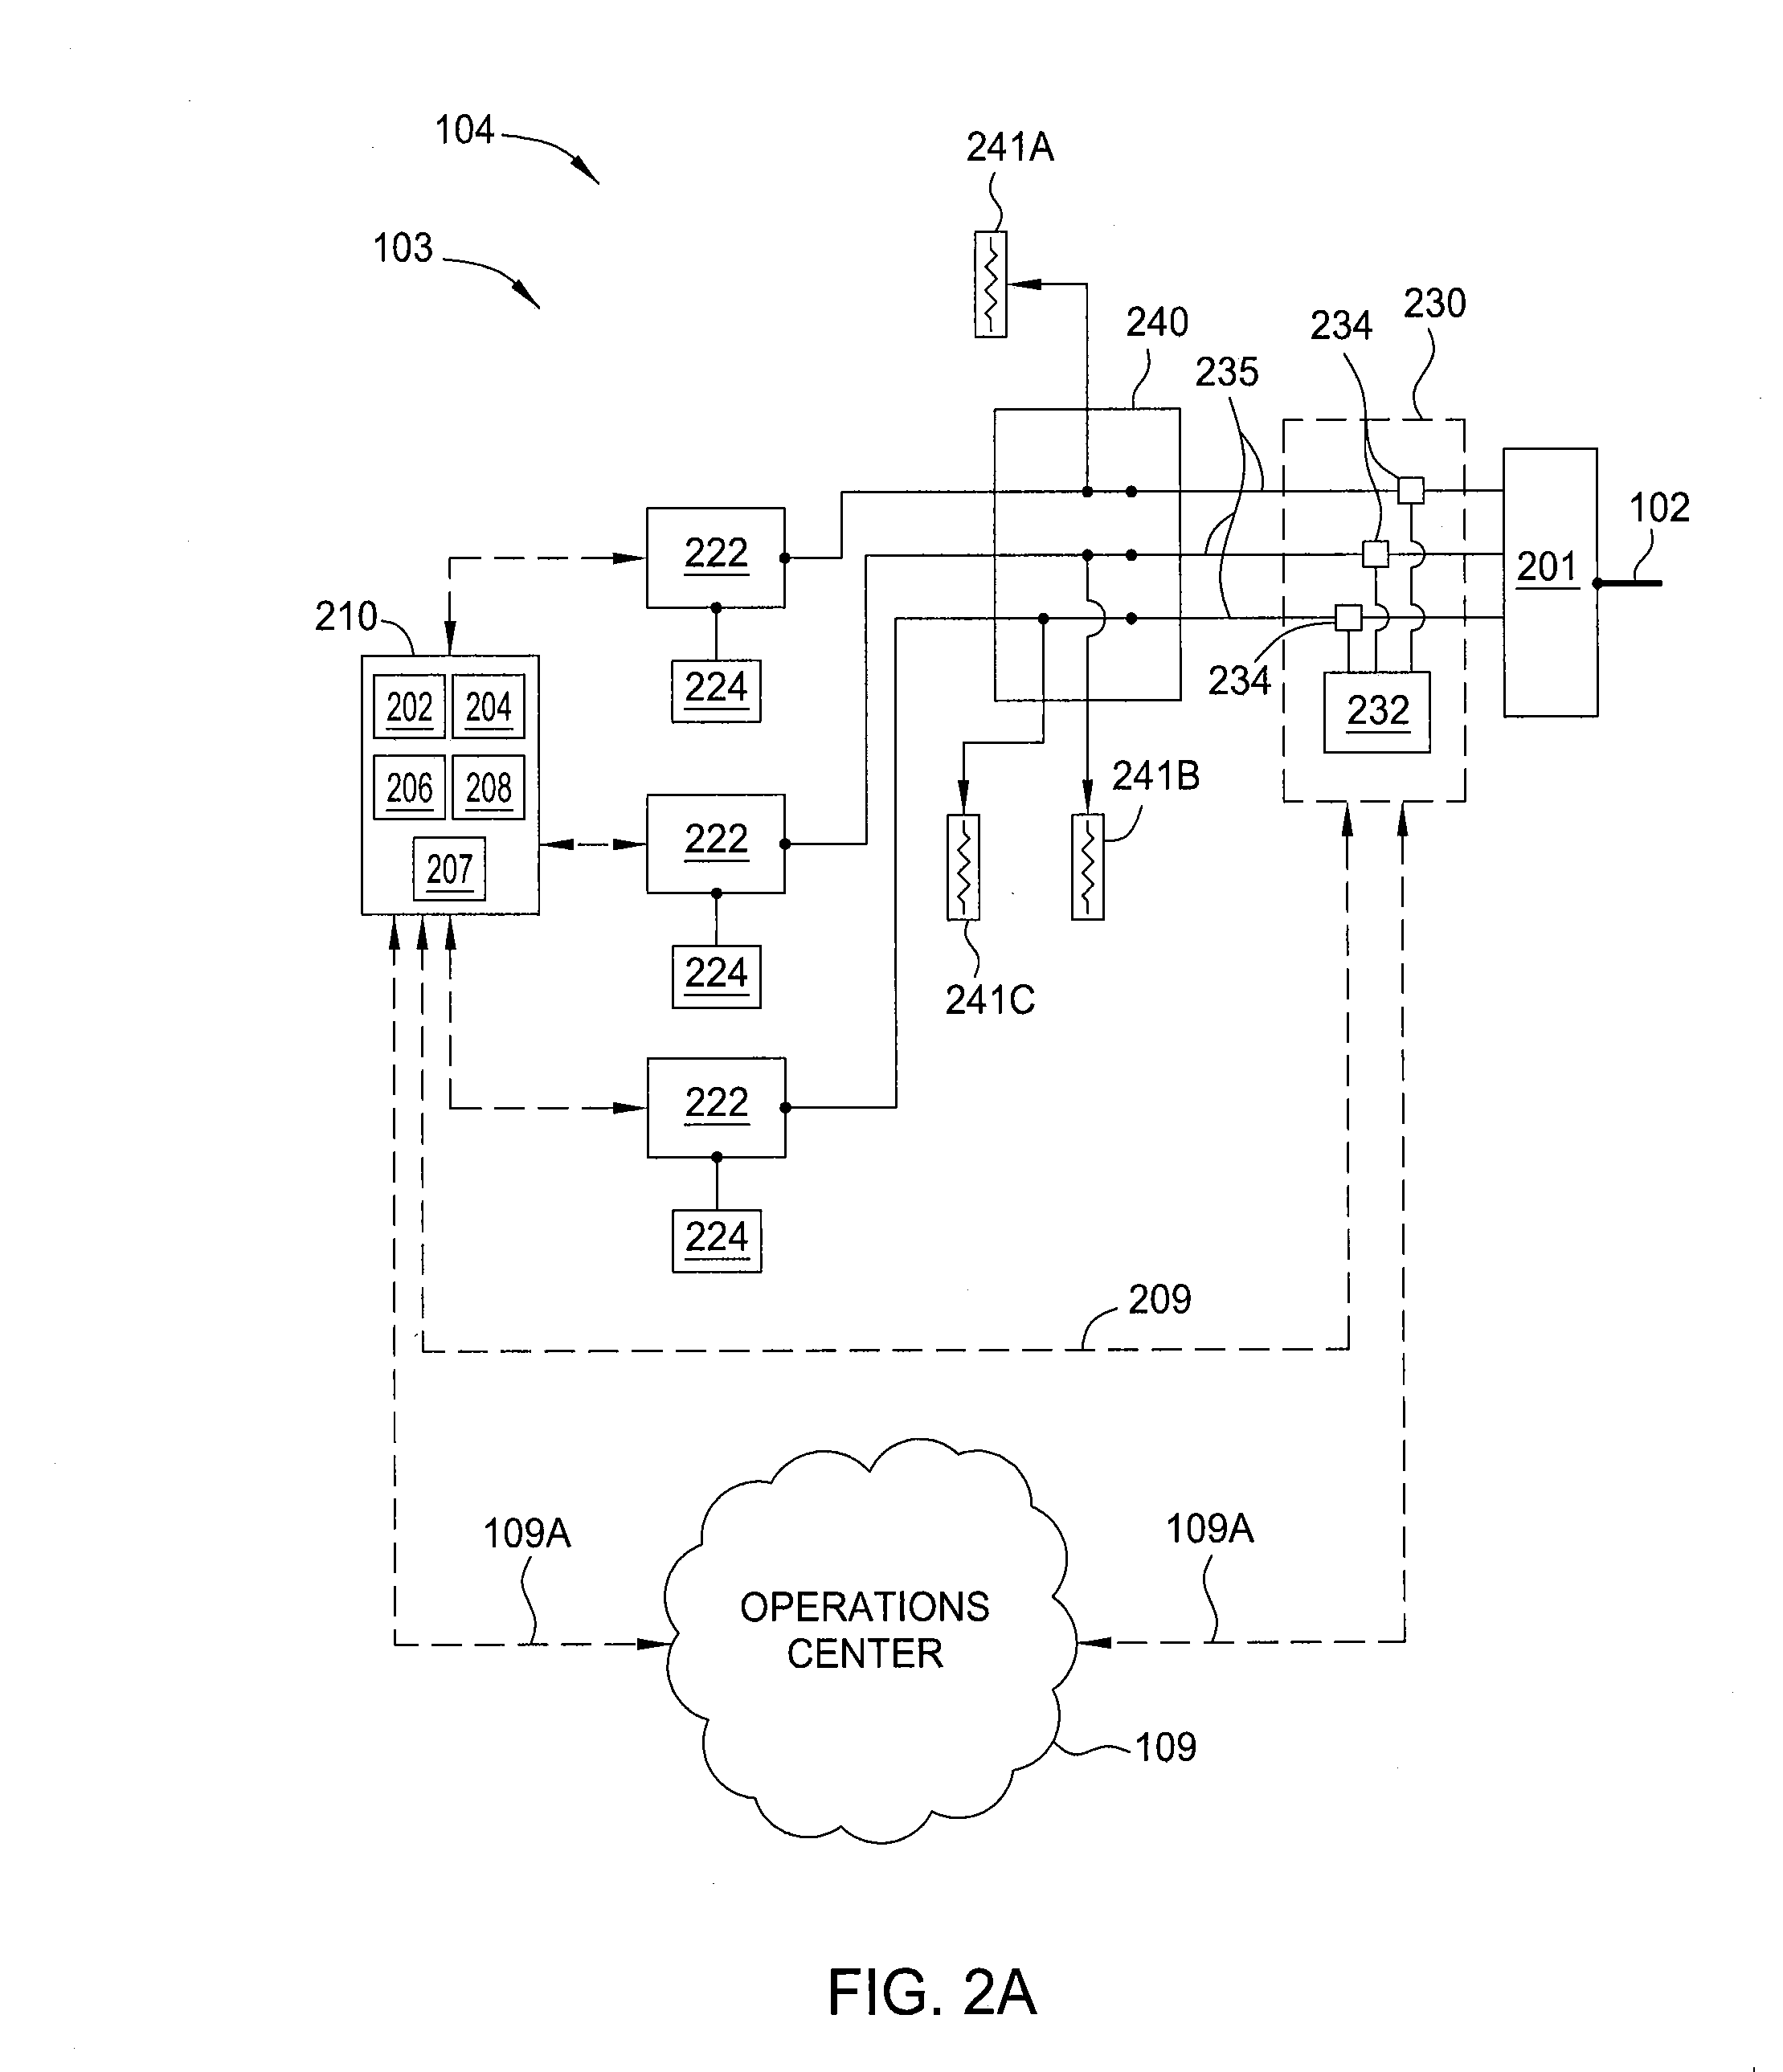 Method and apparatus for stabalizing power on an electrical grid using networked distributed energy storage systems